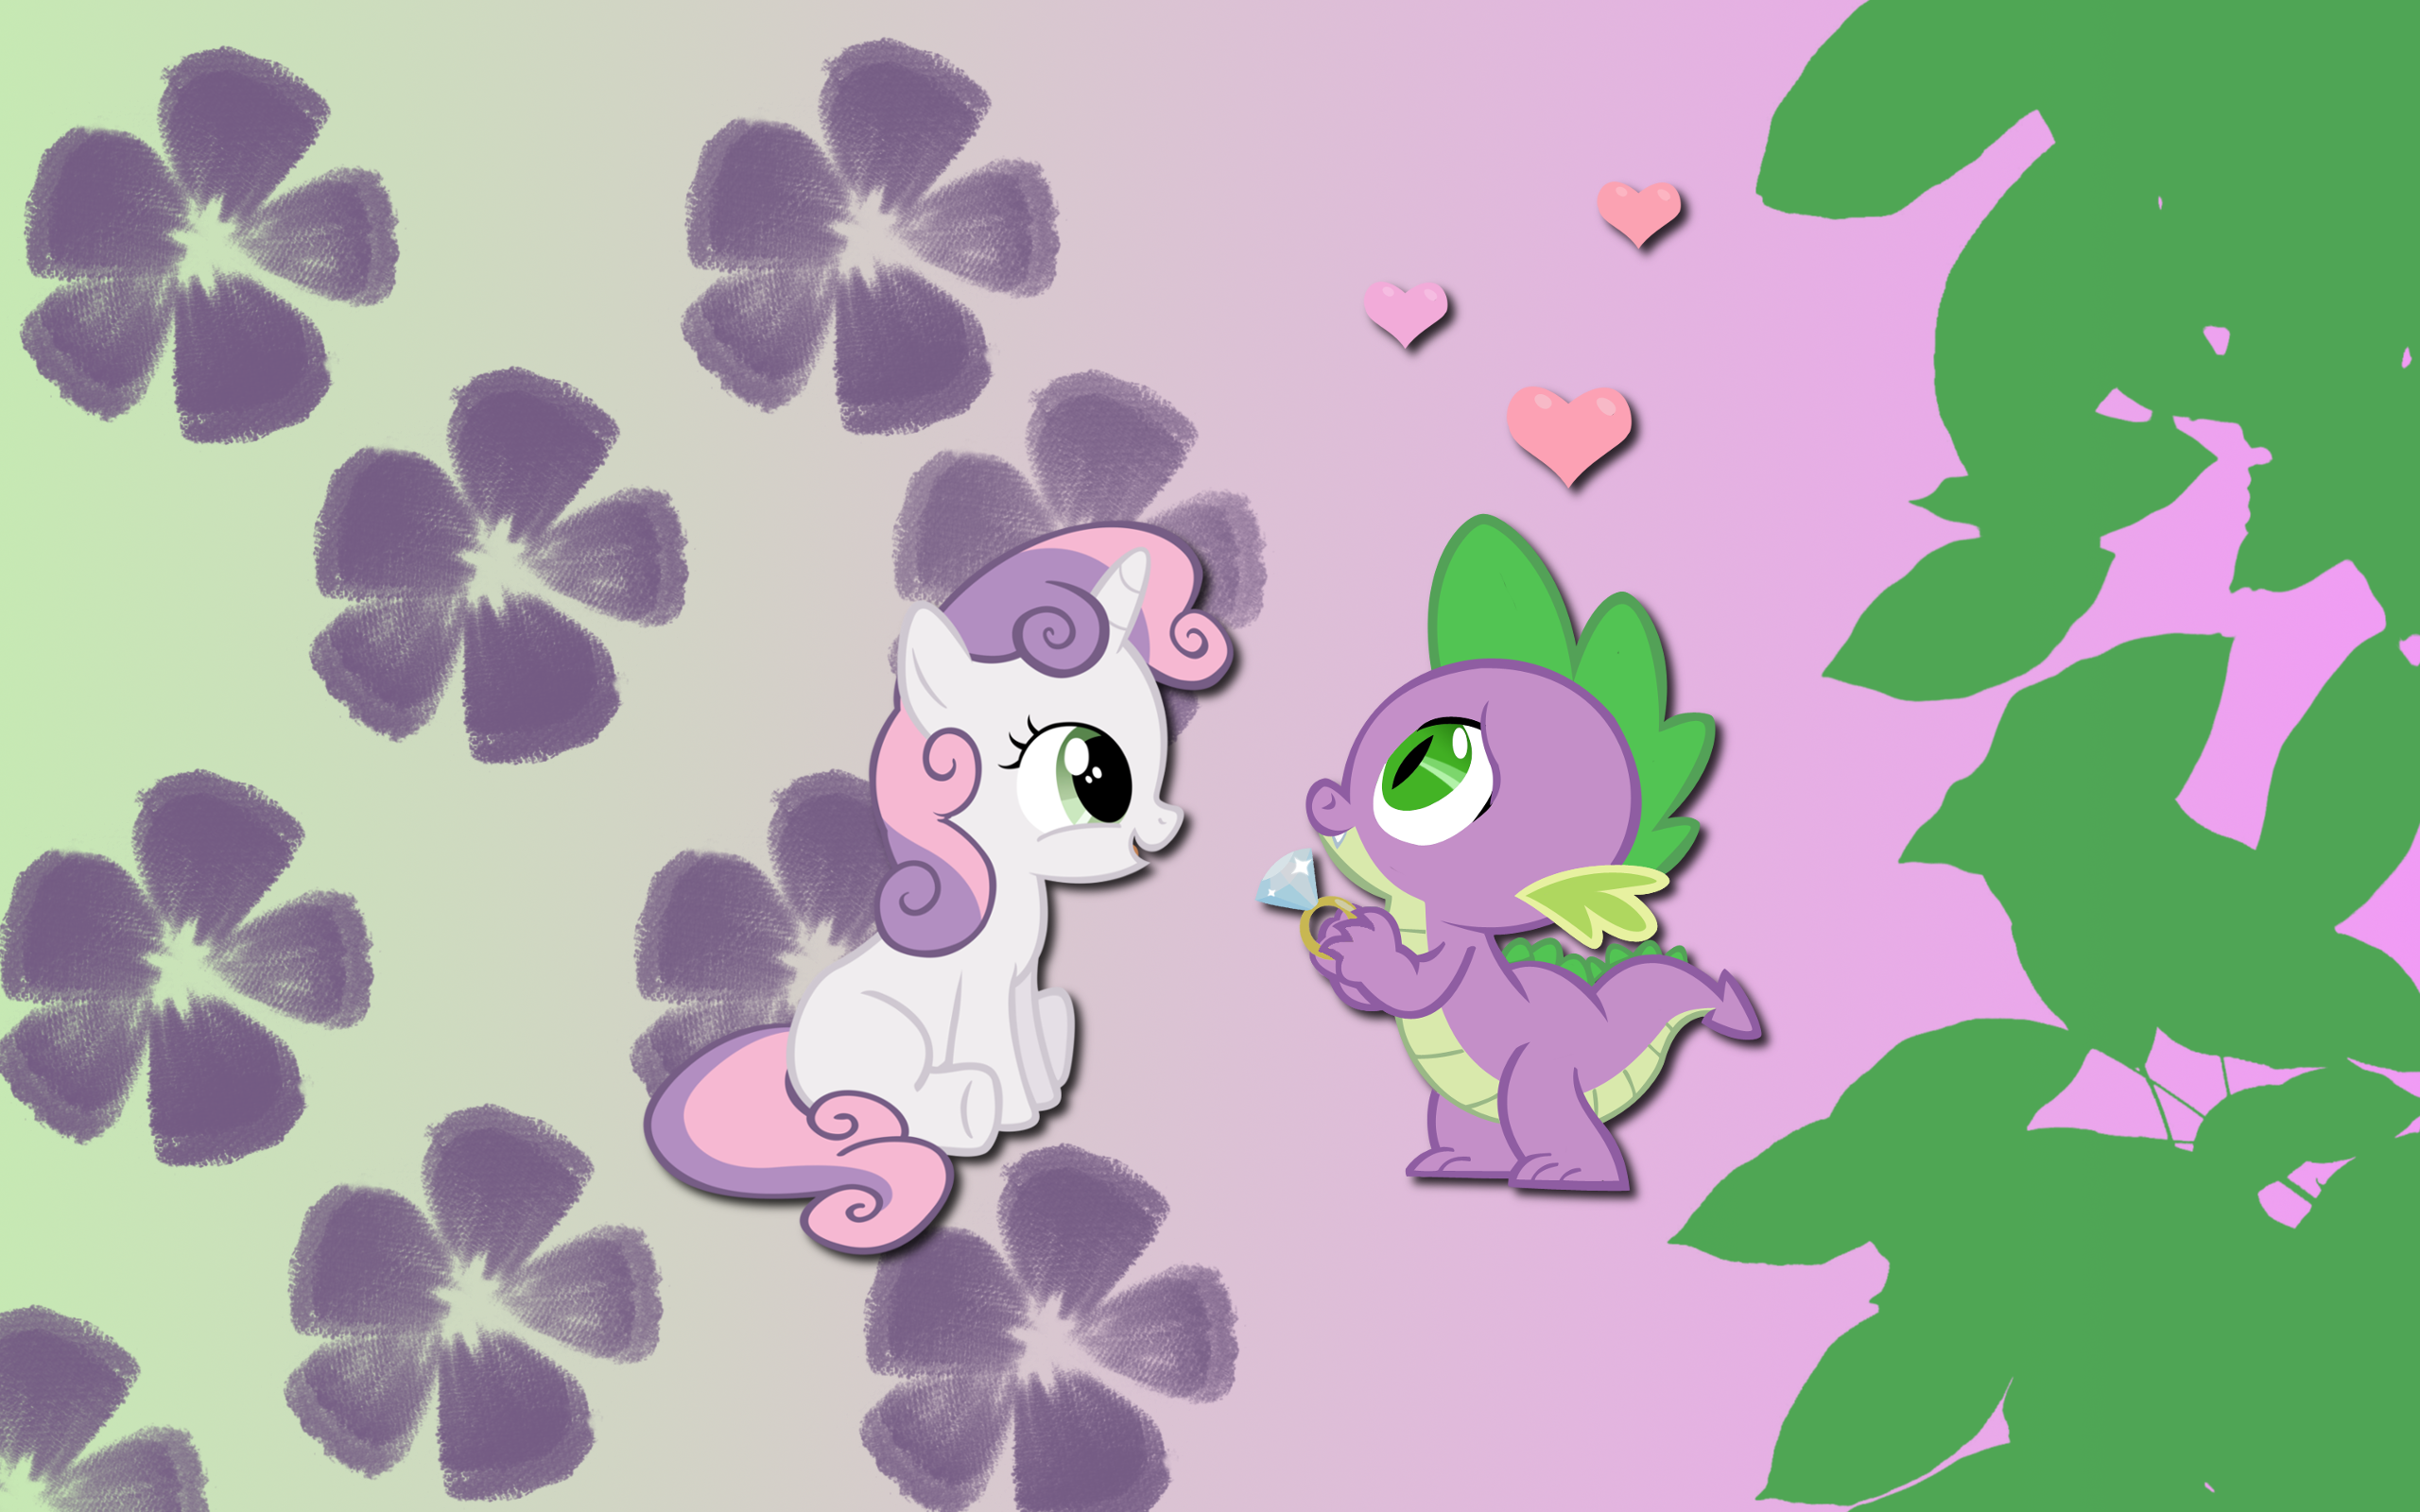 Sweetie Spike wallpaper by AliceHumanSacrifice0, MoongazePonies and NightmareMoonS